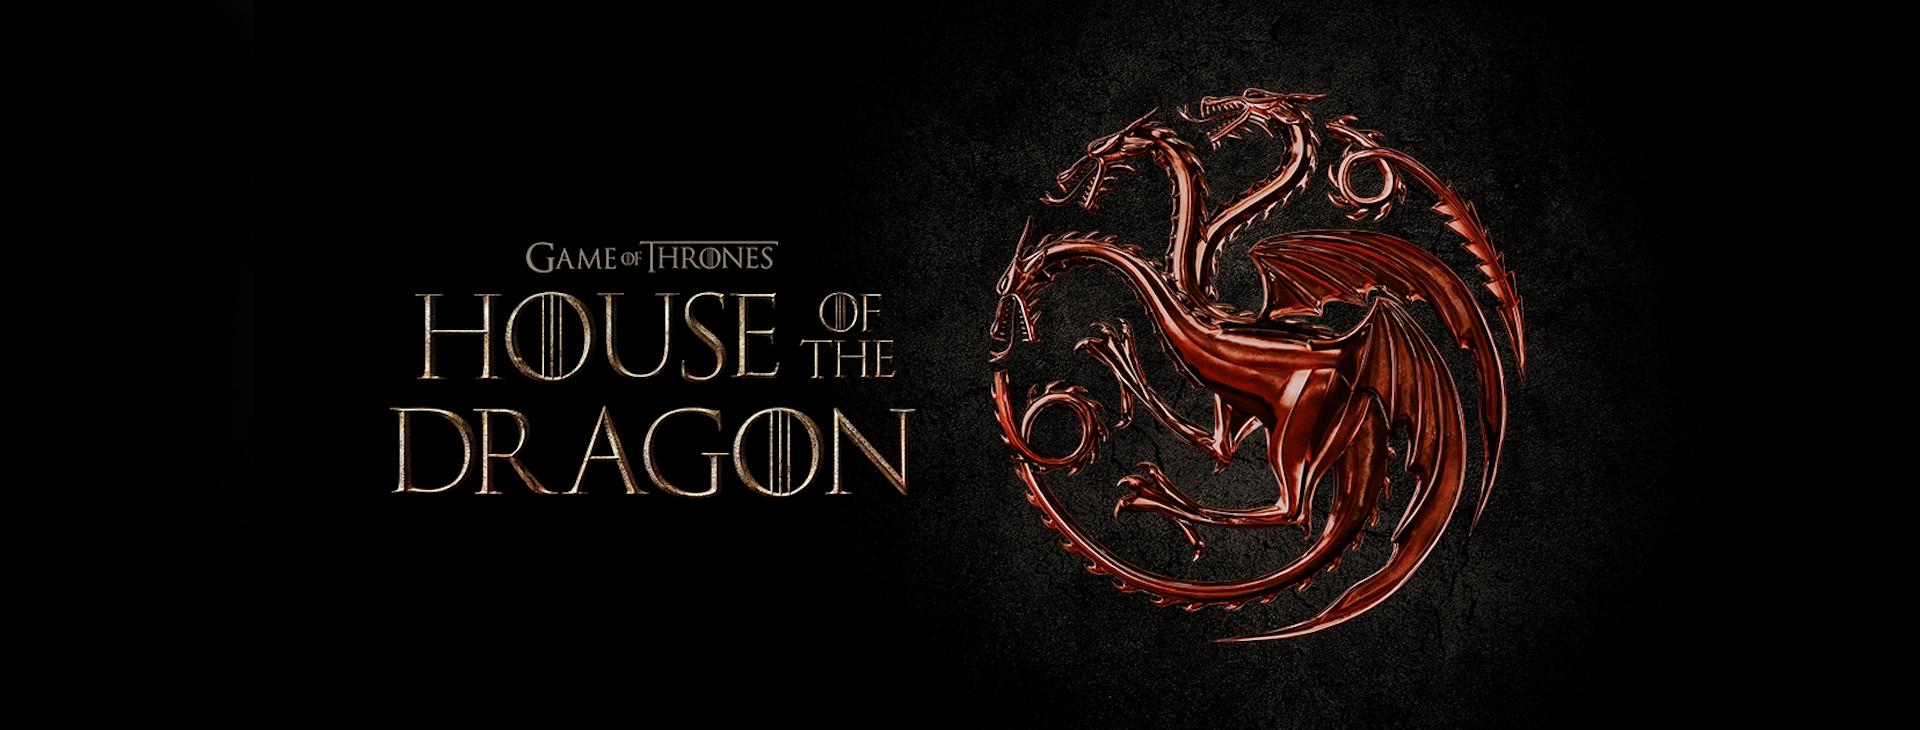 House of the Dragon HD wallpapers free download  Wallpaperbetter